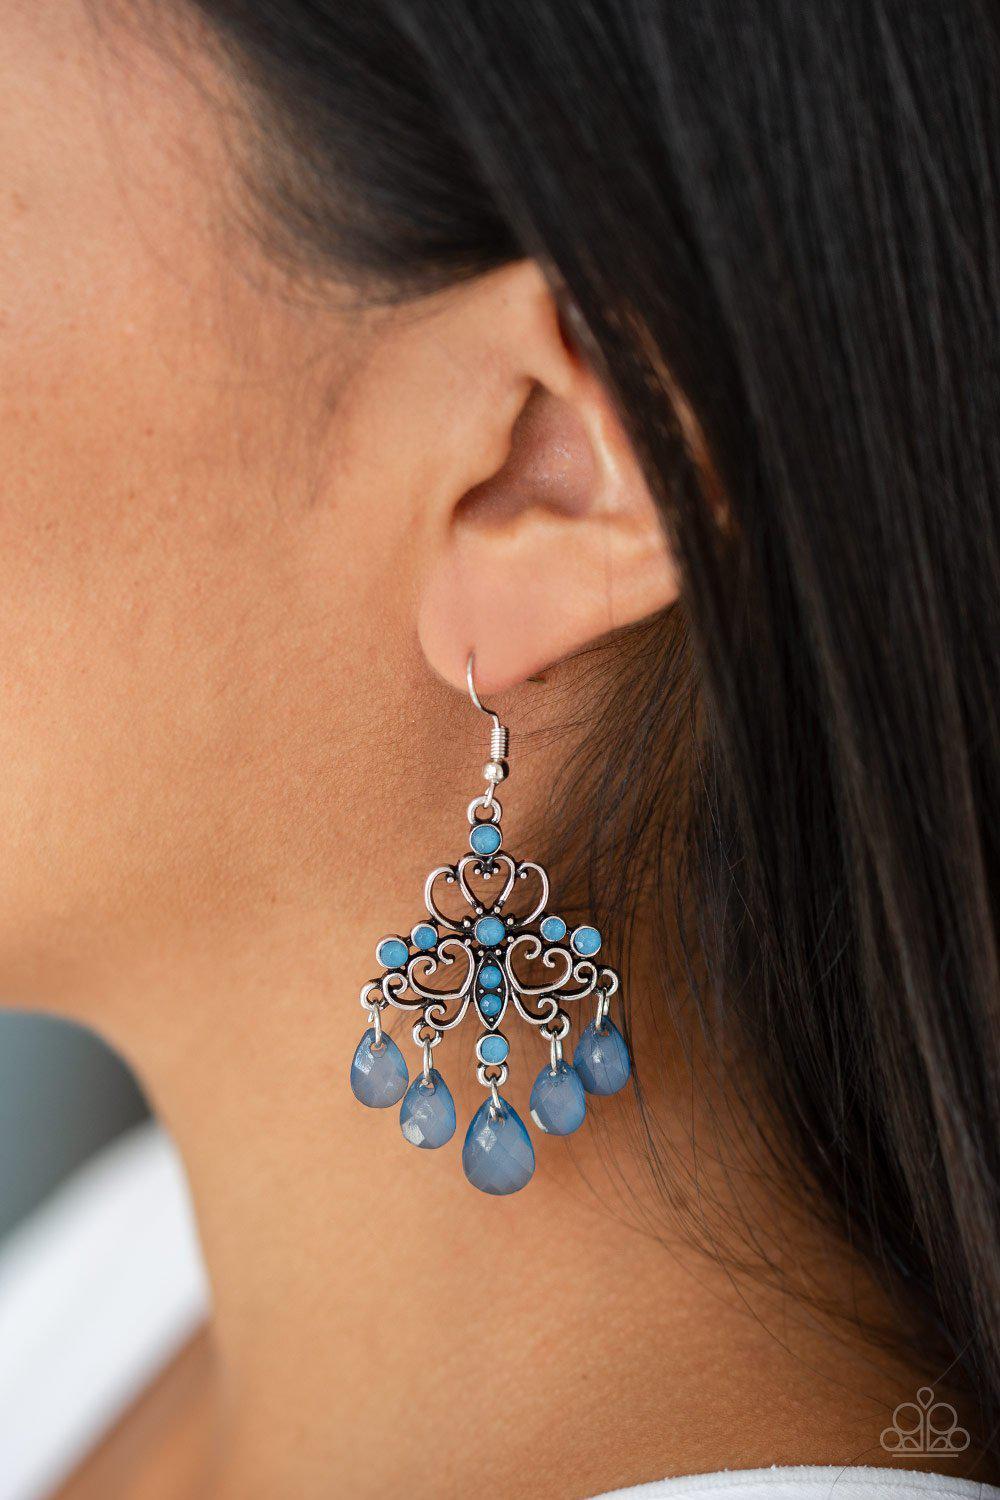 Dip It Glow Blue Earrings - Paparazzi Accessories-CarasShop.com - $5 Jewelry by Cara Jewels